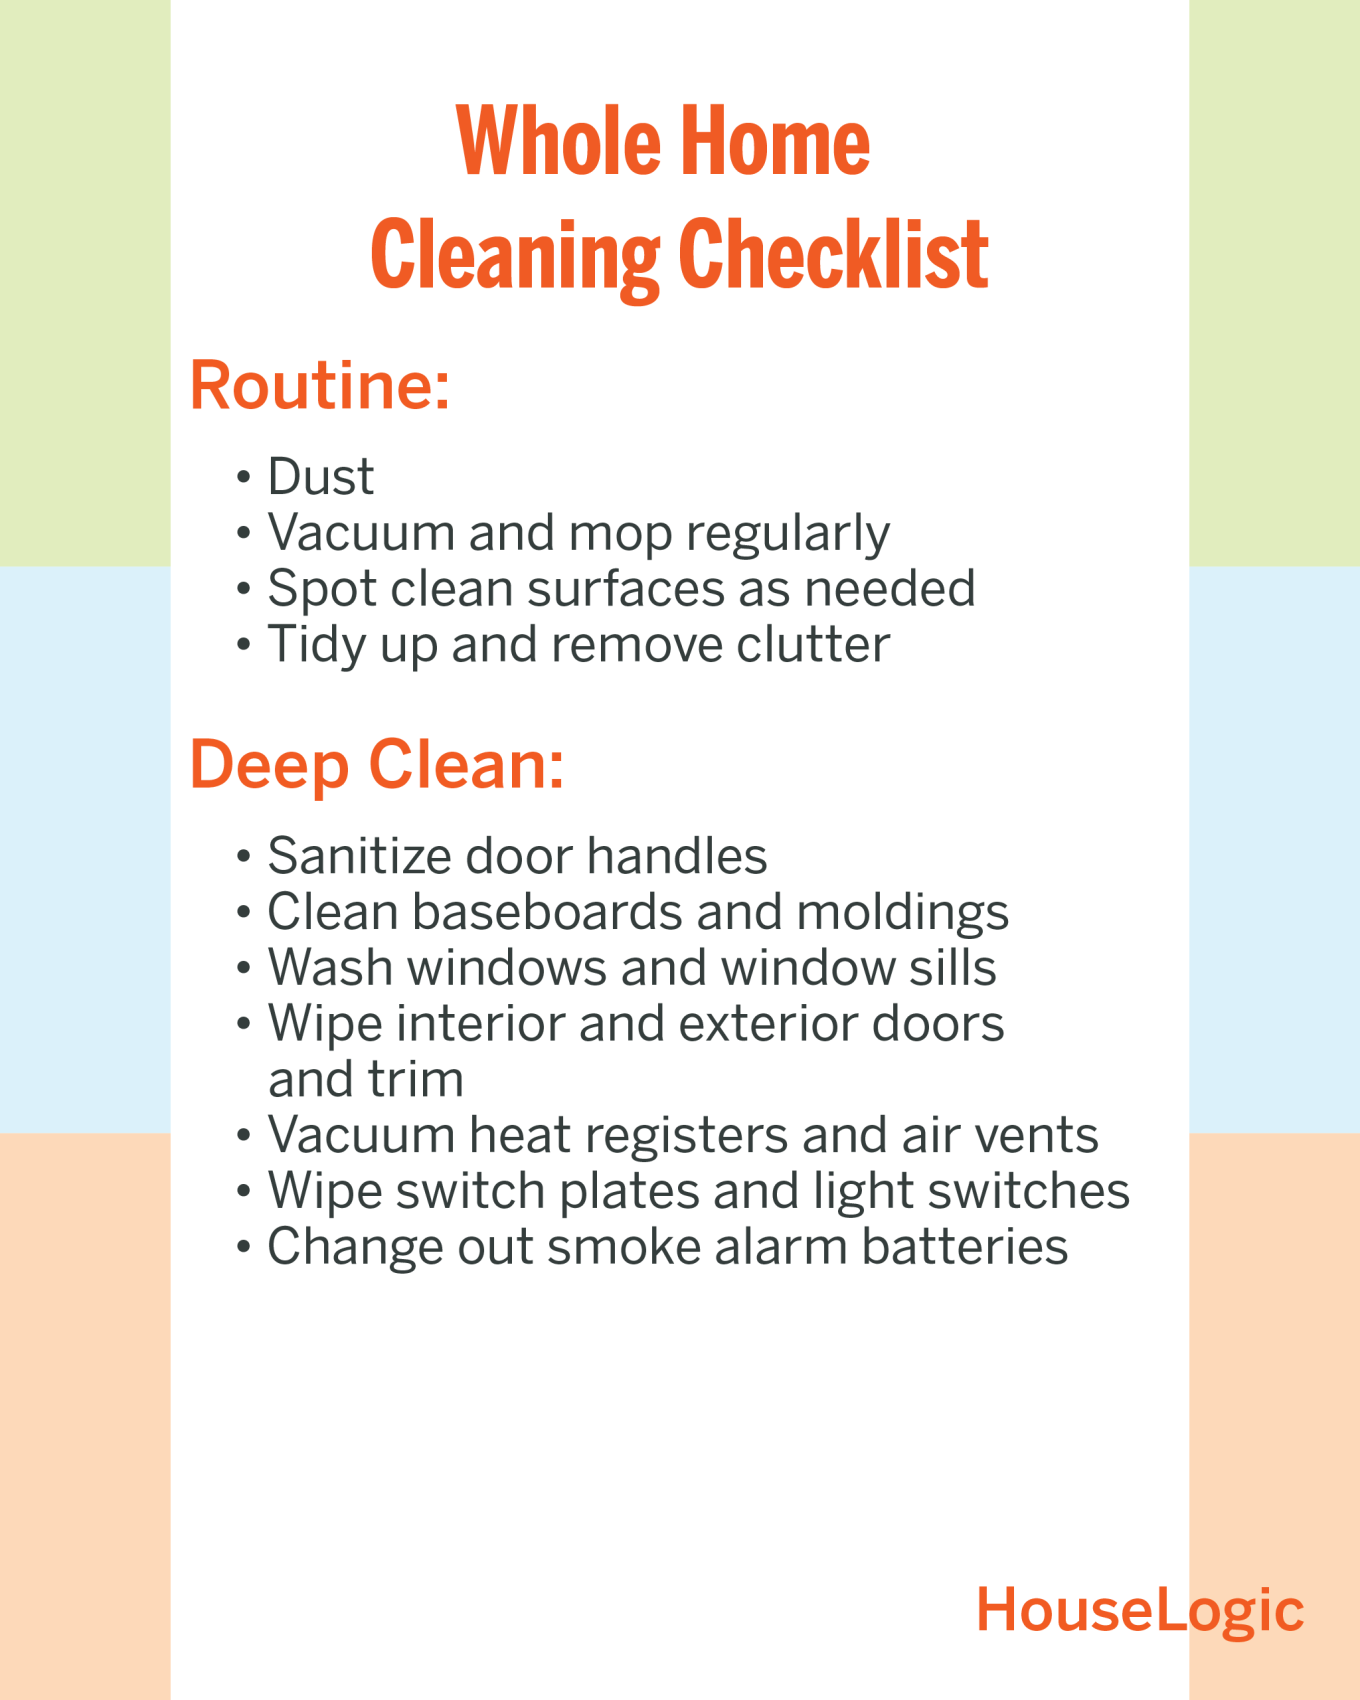 Whole Home Cleaning Checklist